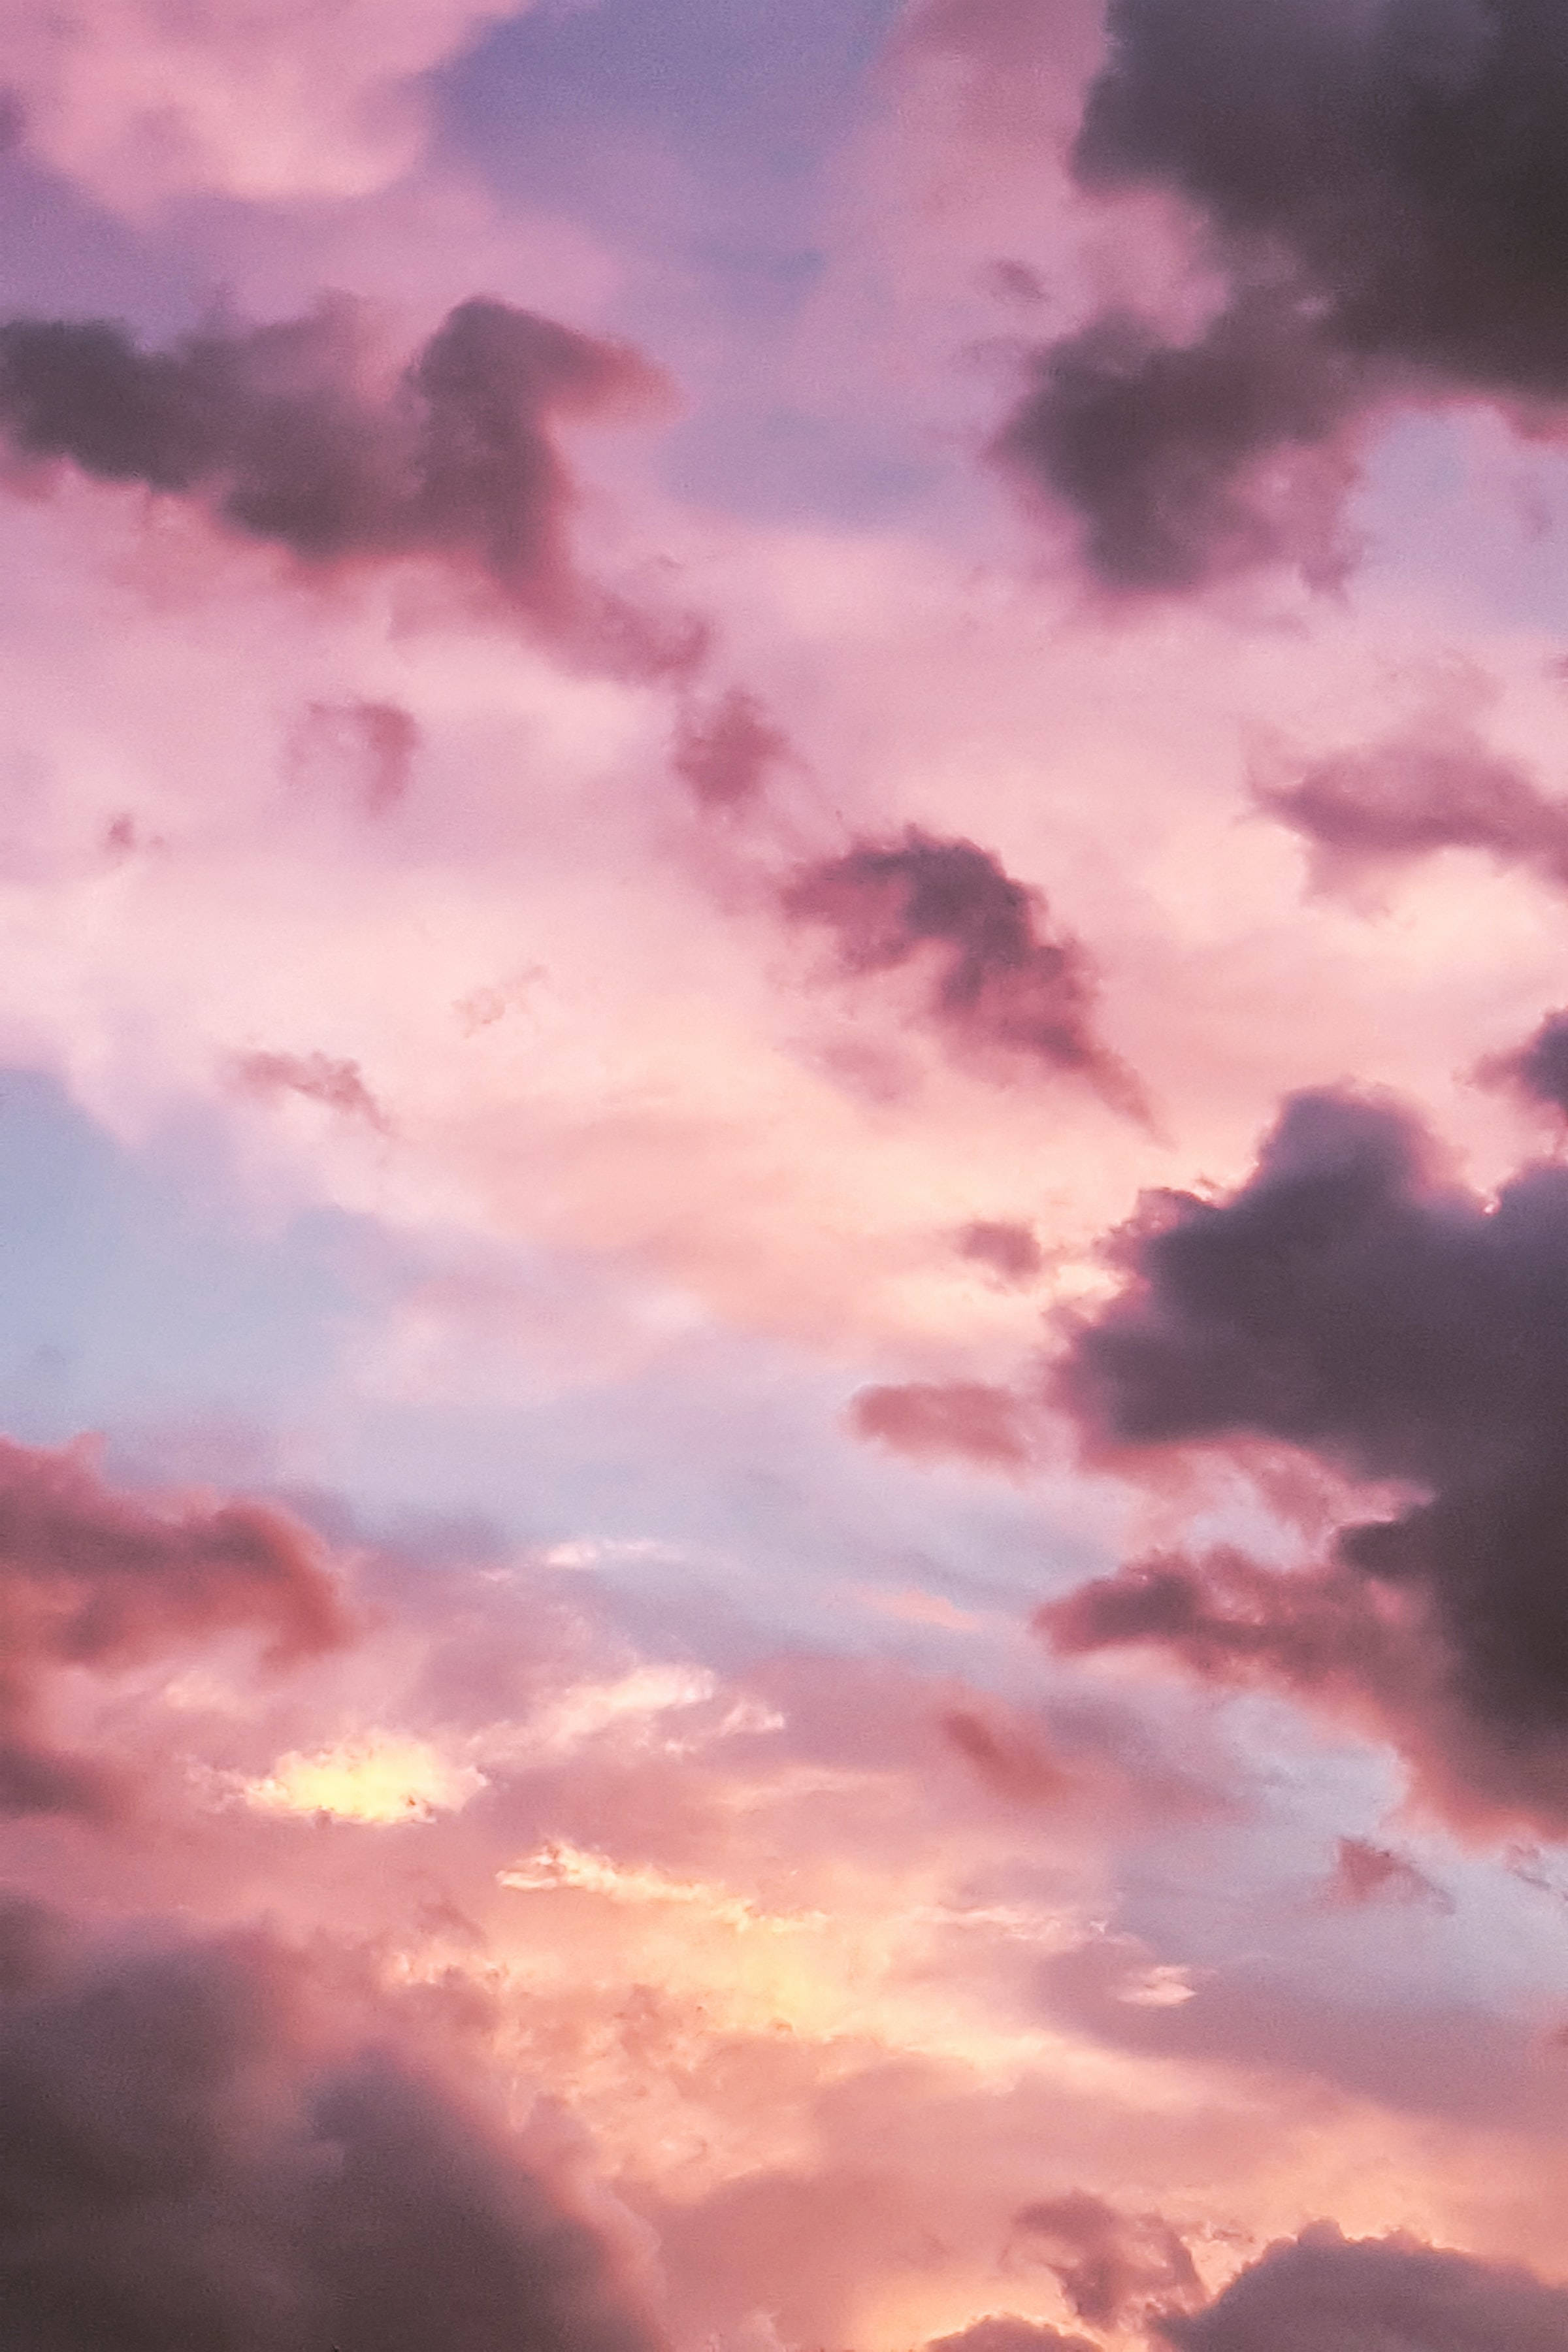 Cute Pink Aesthetic Sky With Overcast Clouds Background